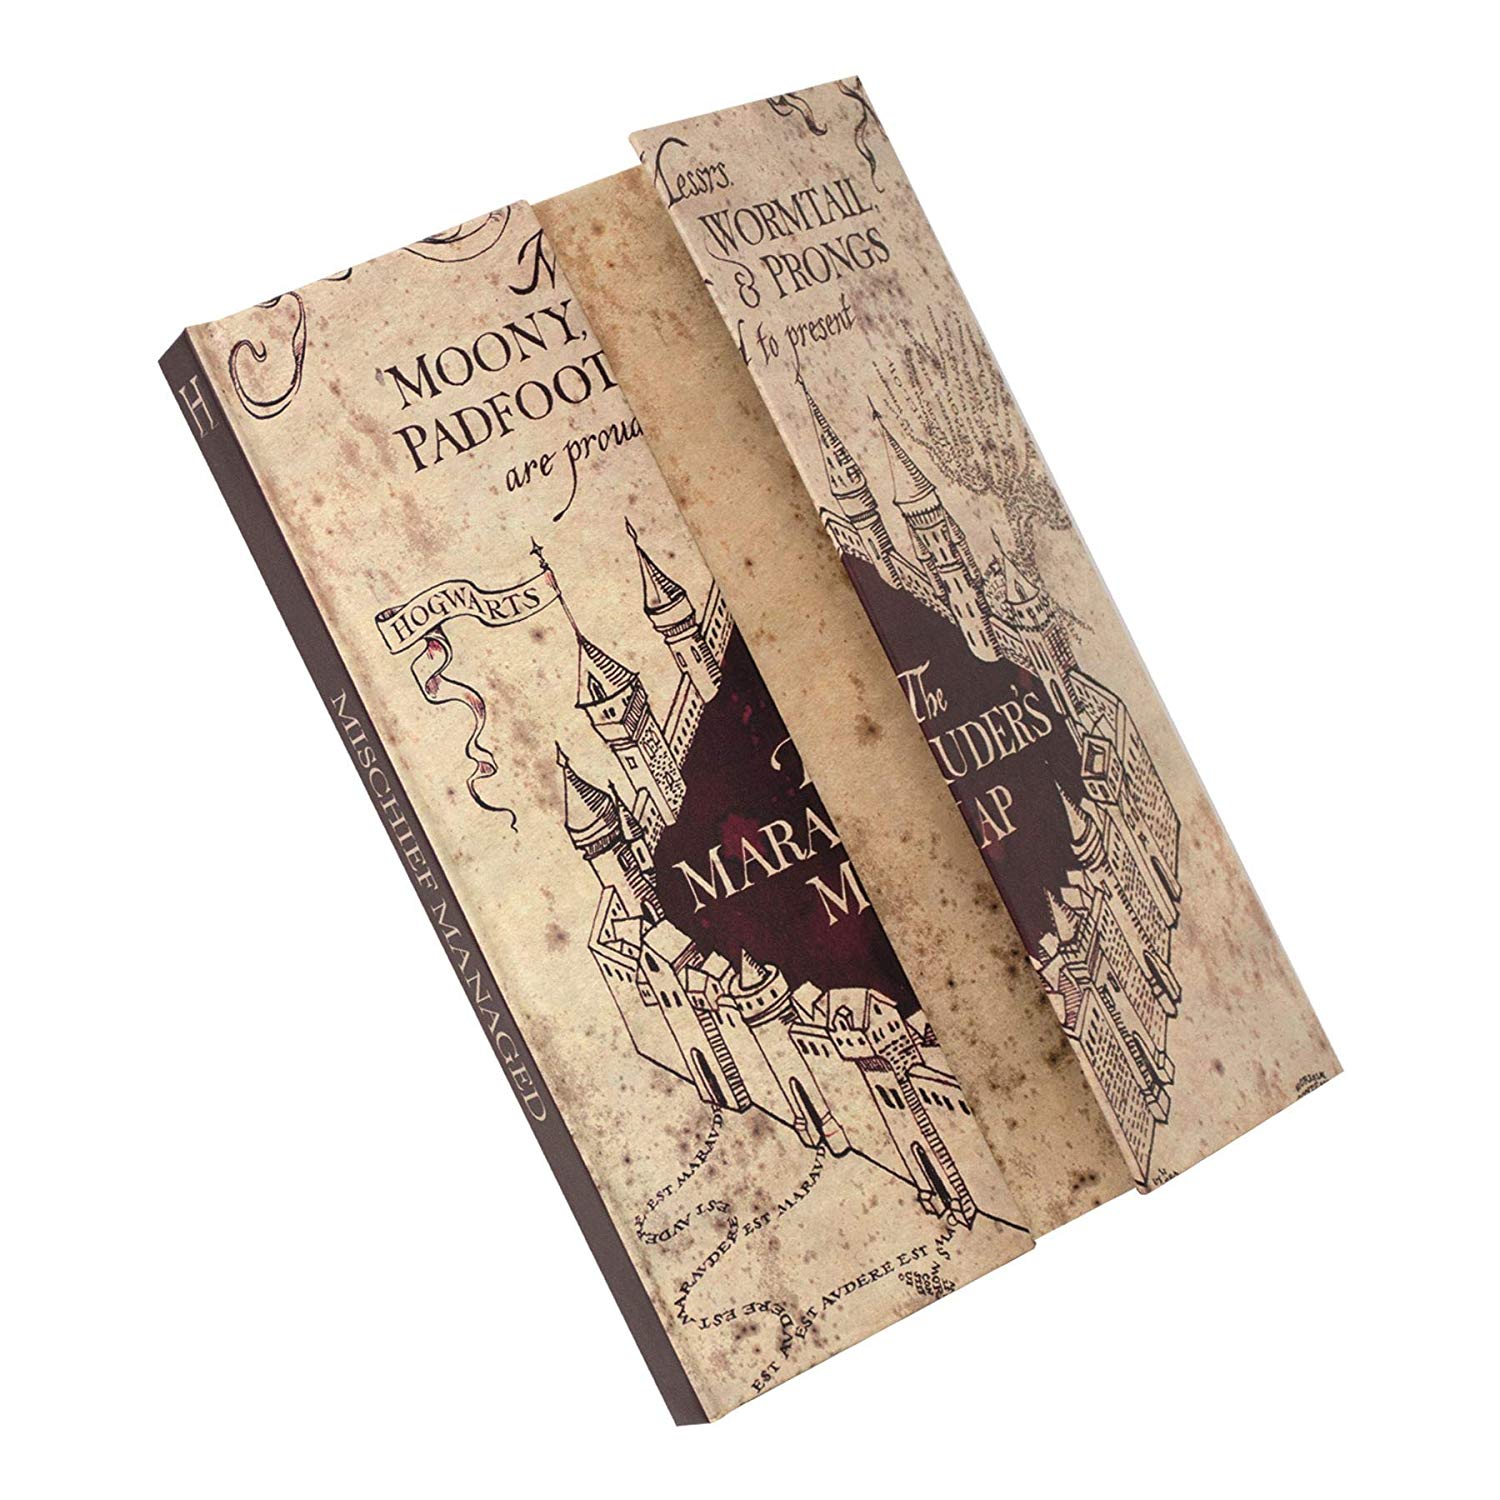 Harry Potter Marauders Map A5 Notebook Stationery